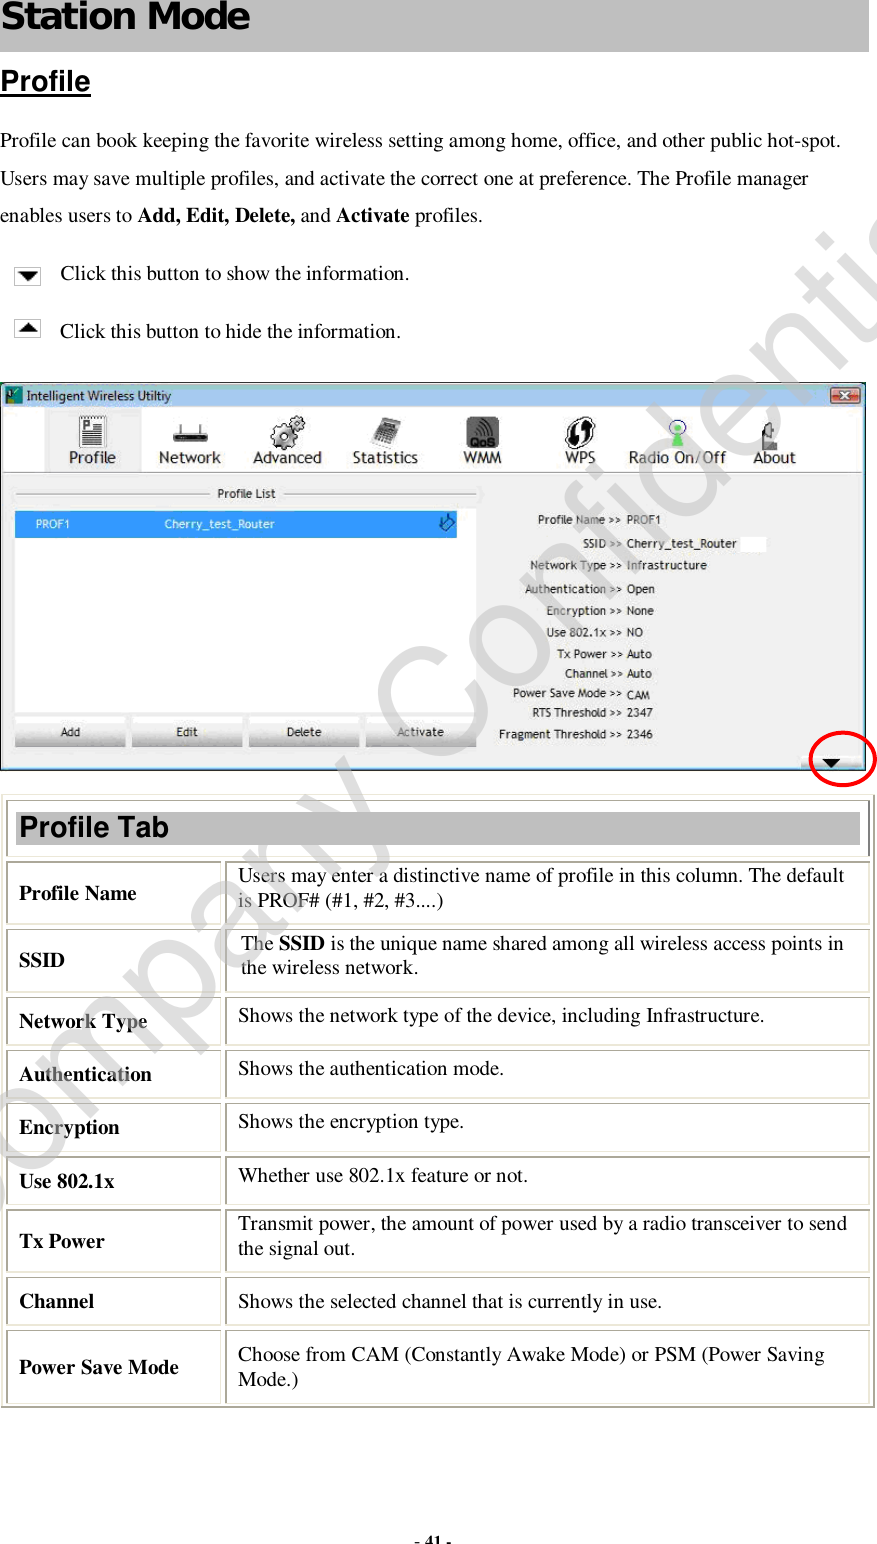  - 41 - Station Mode Profile Profile can book keeping the favorite wireless setting among home, office, and other public hot-spot. Users may save multiple profiles, and activate the correct one at preference. The Profile manager enables users to Add, Edit, Delete, and Activate profiles. Click this button to show the information. Click this button to hide the information.  Profile Tab Profile Name  Users may enter a distinctive name of profile in this column. The default is PROF# (#1, #2, #3....) SSID  The SSID is the unique name shared among all wireless access points in the wireless network. Network Type  Shows the network type of the device, including Infrastructure. Authentication  Shows the authentication mode. Encryption  Shows the encryption type. Use 802.1x   Whether use 802.1x feature or not. Tx Power   Transmit power, the amount of power used by a radio transceiver to send the signal out. Channel  Shows the selected channel that is currently in use.  Power Save Mode  Choose from CAM (Constantly Awake Mode) or PSM (Power Saving Mode.) Company Confidential